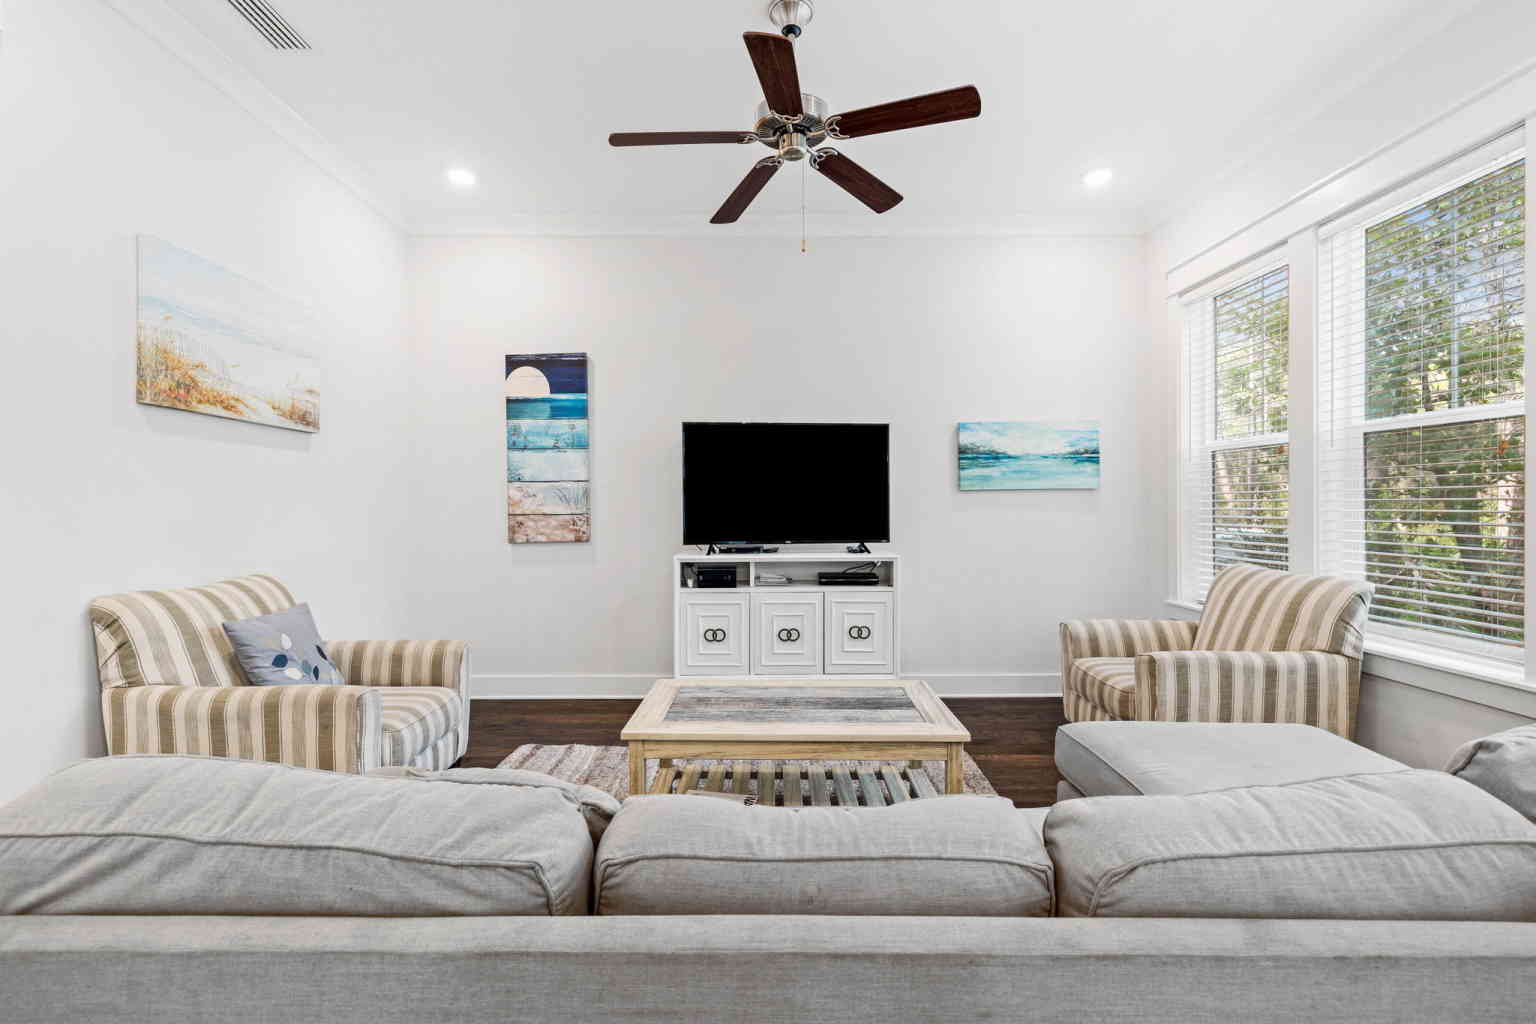 Beautiful 3-bedroom beach house located in Prominence,30A.